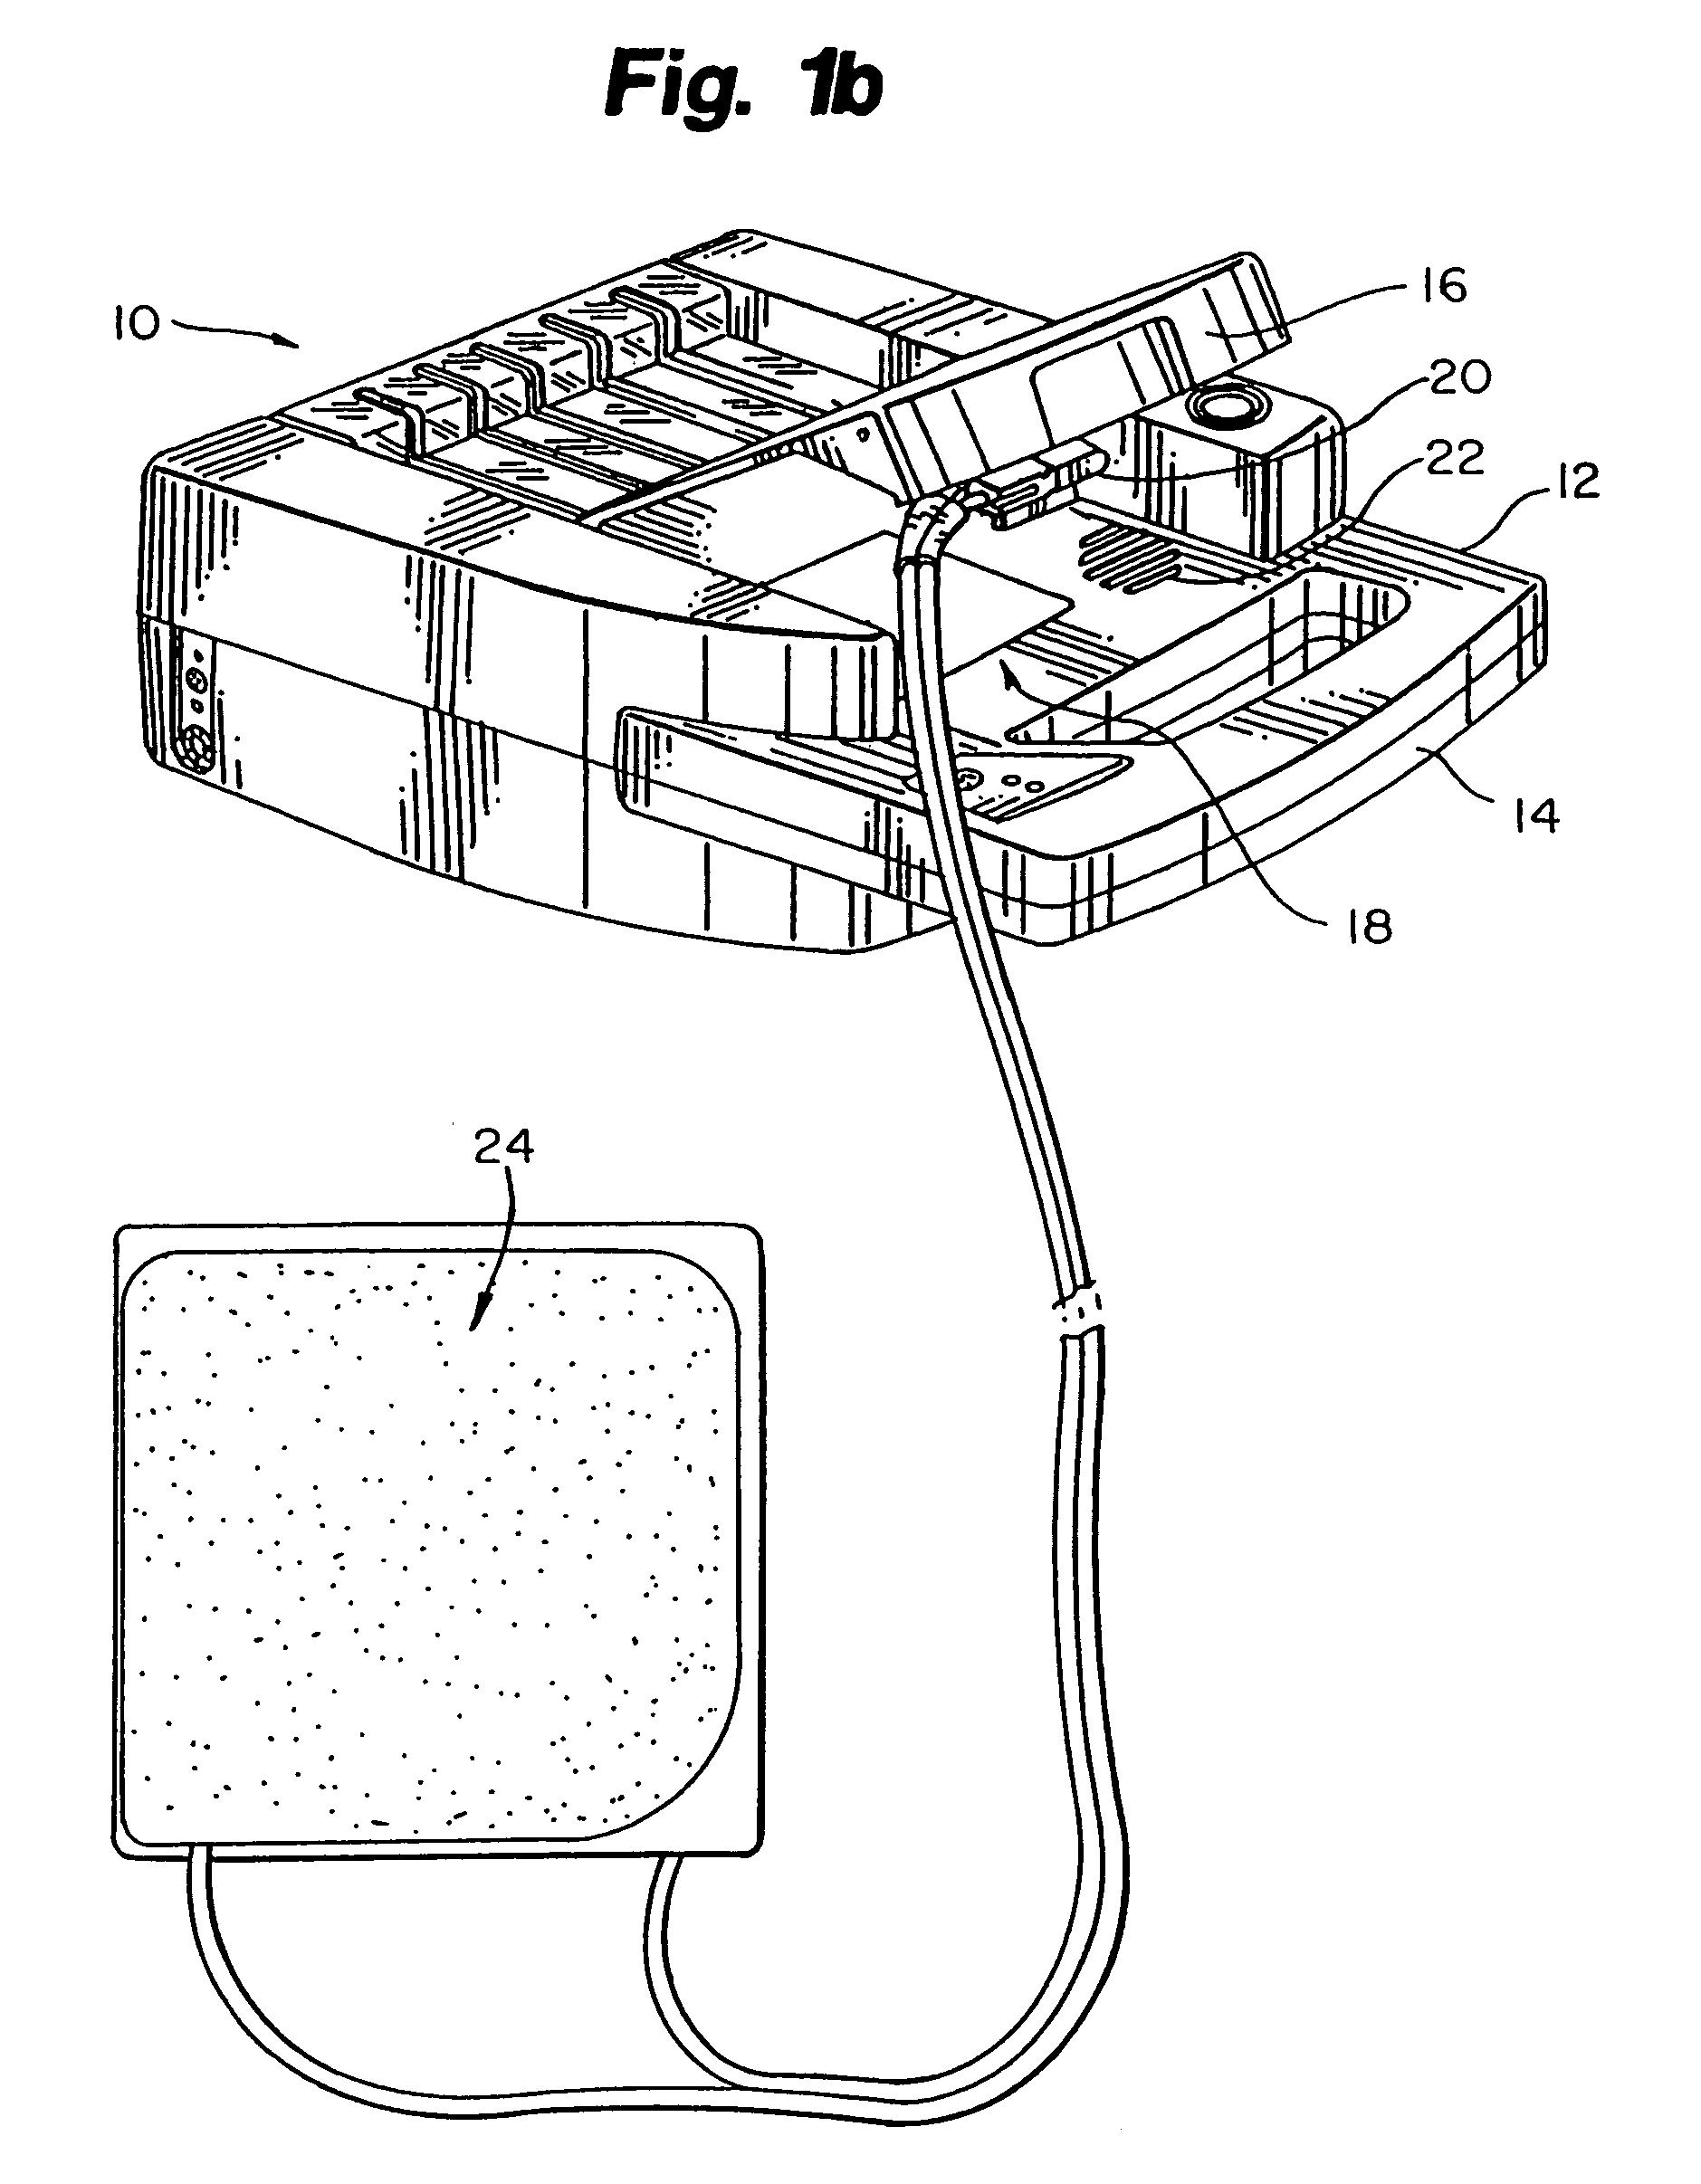 Method and apparatus for delivering a biphasic defibrillation pulse with variable energy